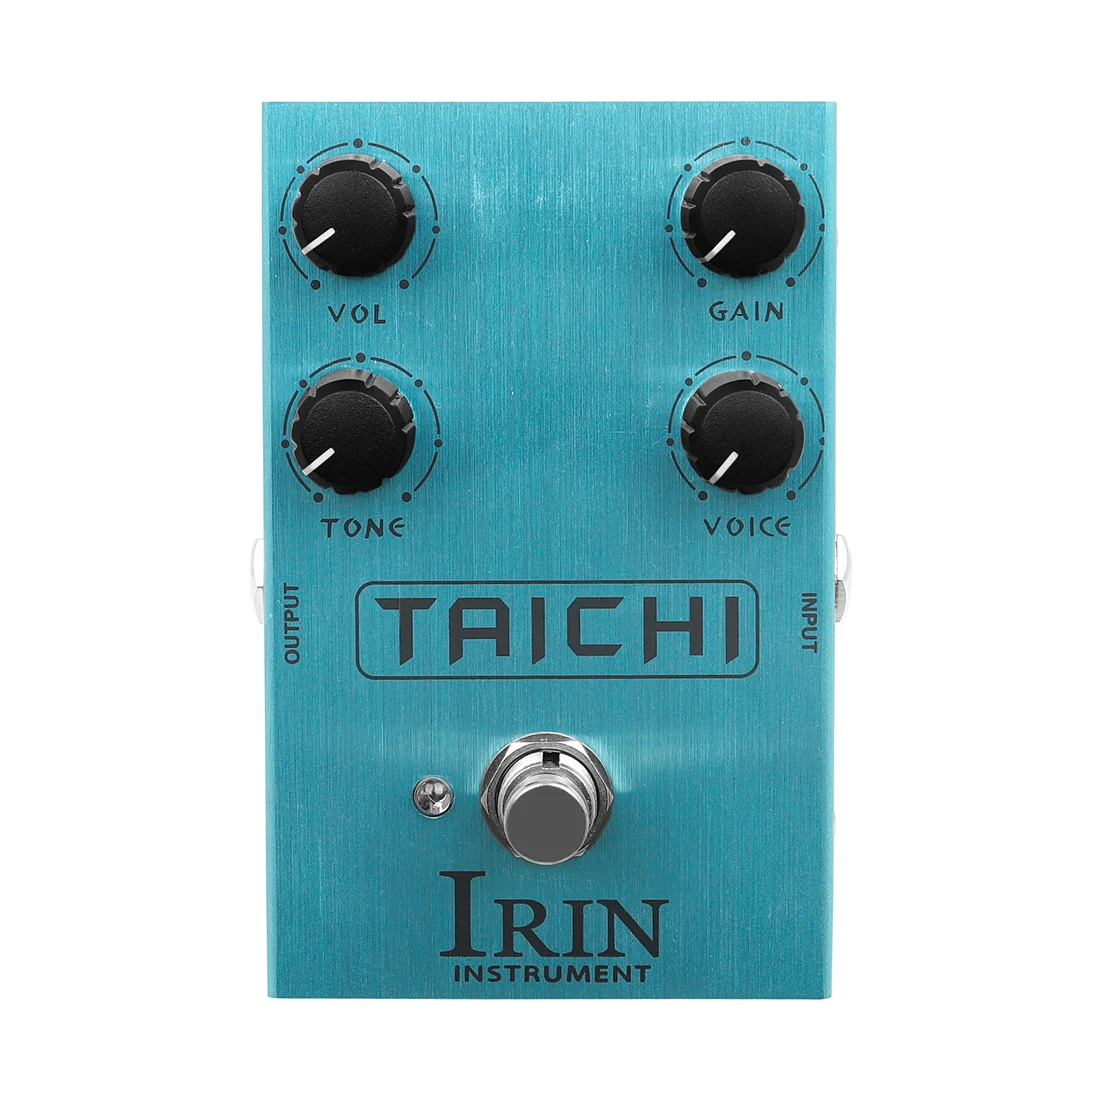 

IRIN AN-38 TAICHI Low Gain Overdrive Pedal OD Classic Amp Sound VOICE Knob Controls Different EQ Frequency Bands Guitar Effects